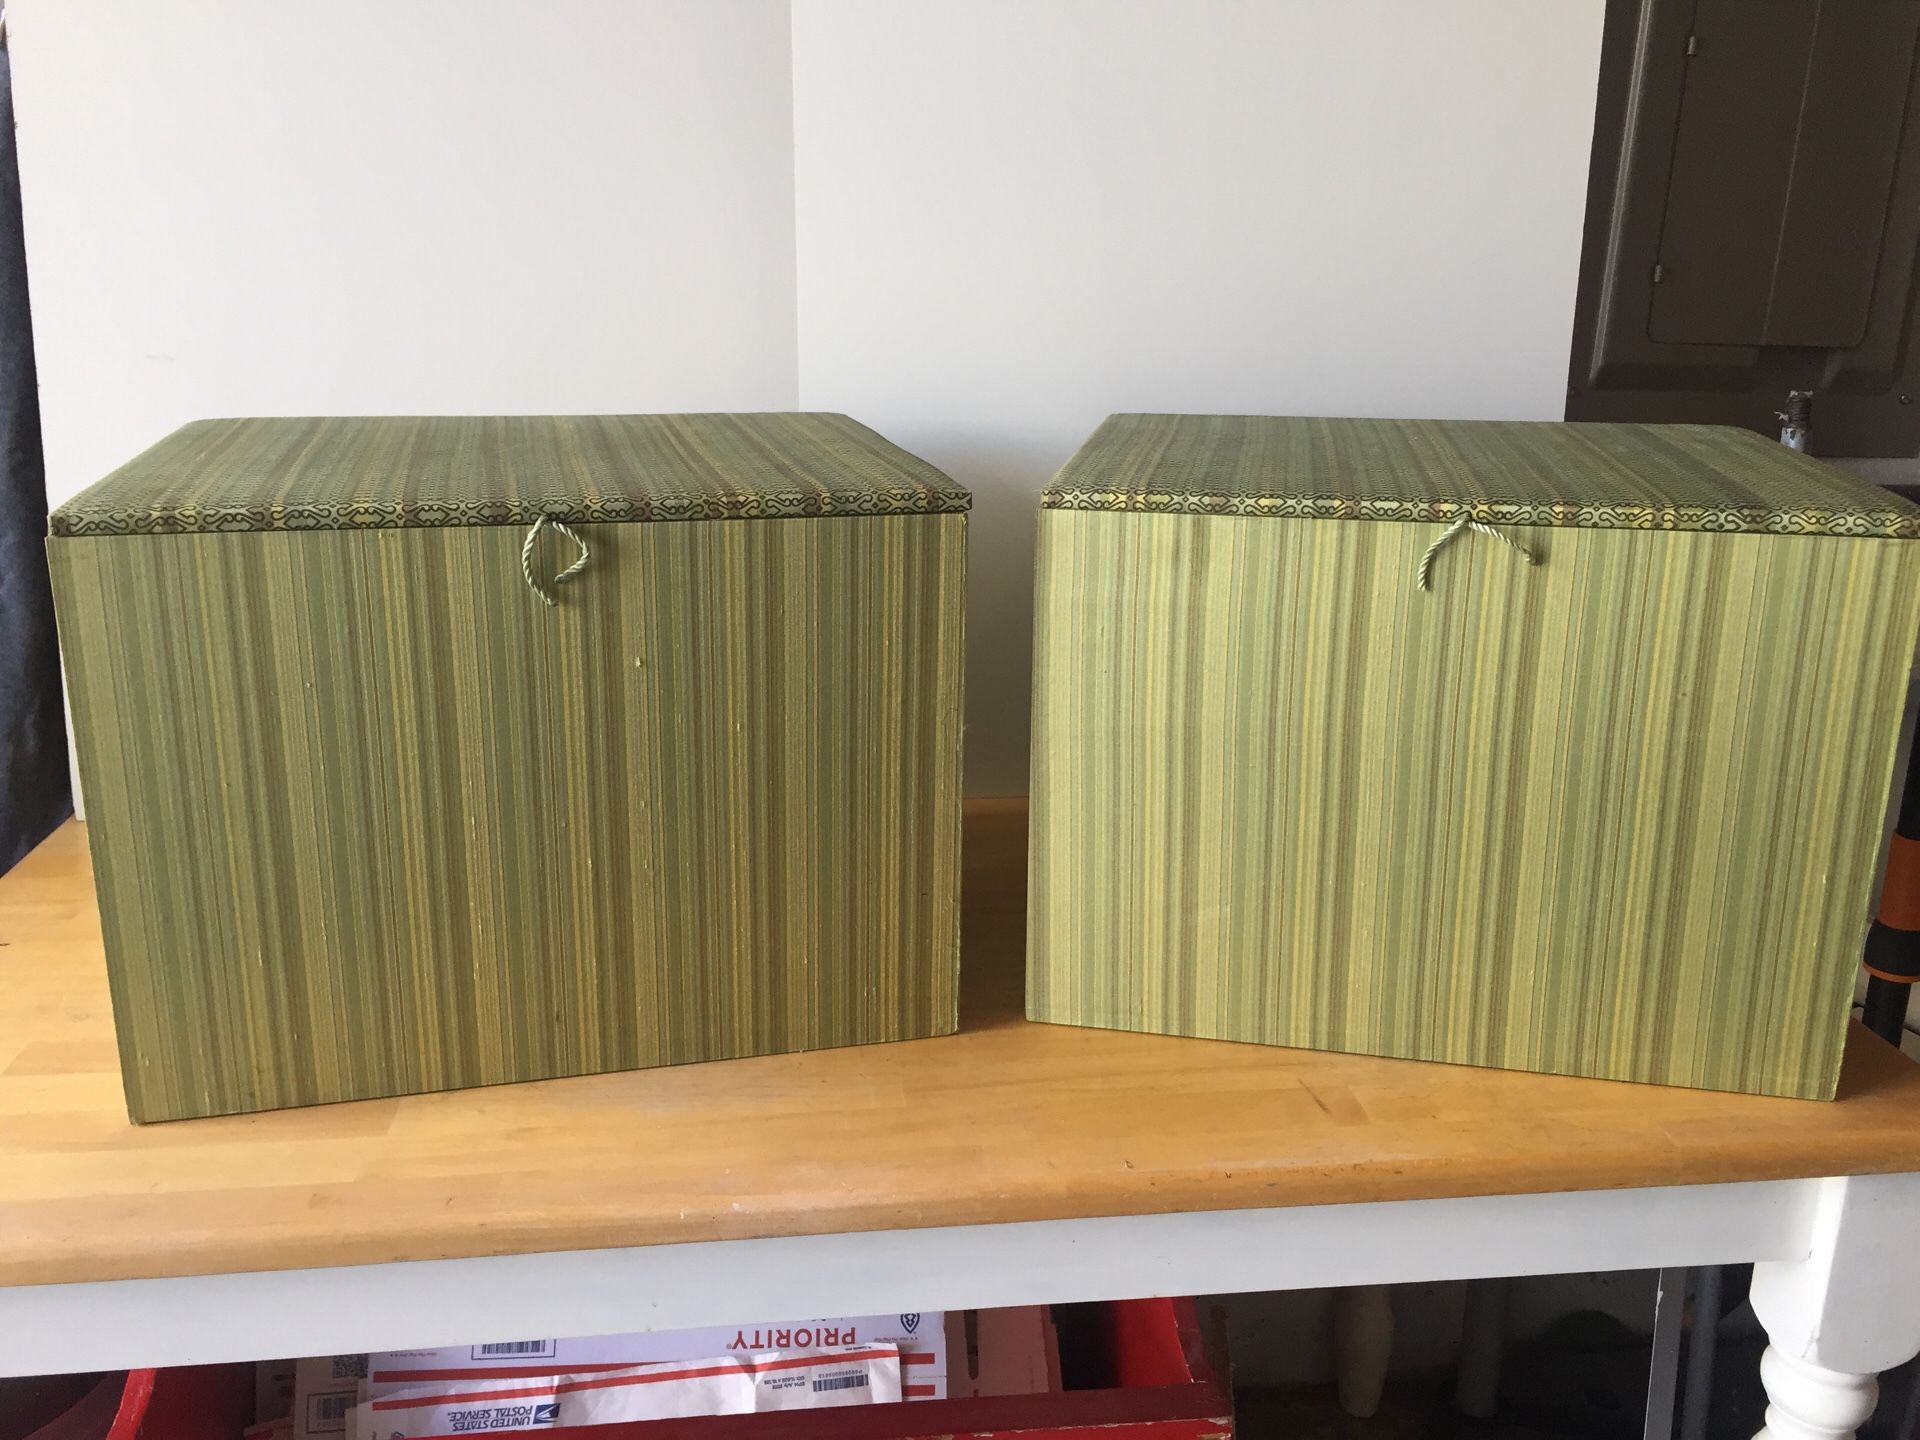 Pair of Fabric covered file boxes/ storage boxes from either Pottery barn or Pier 1